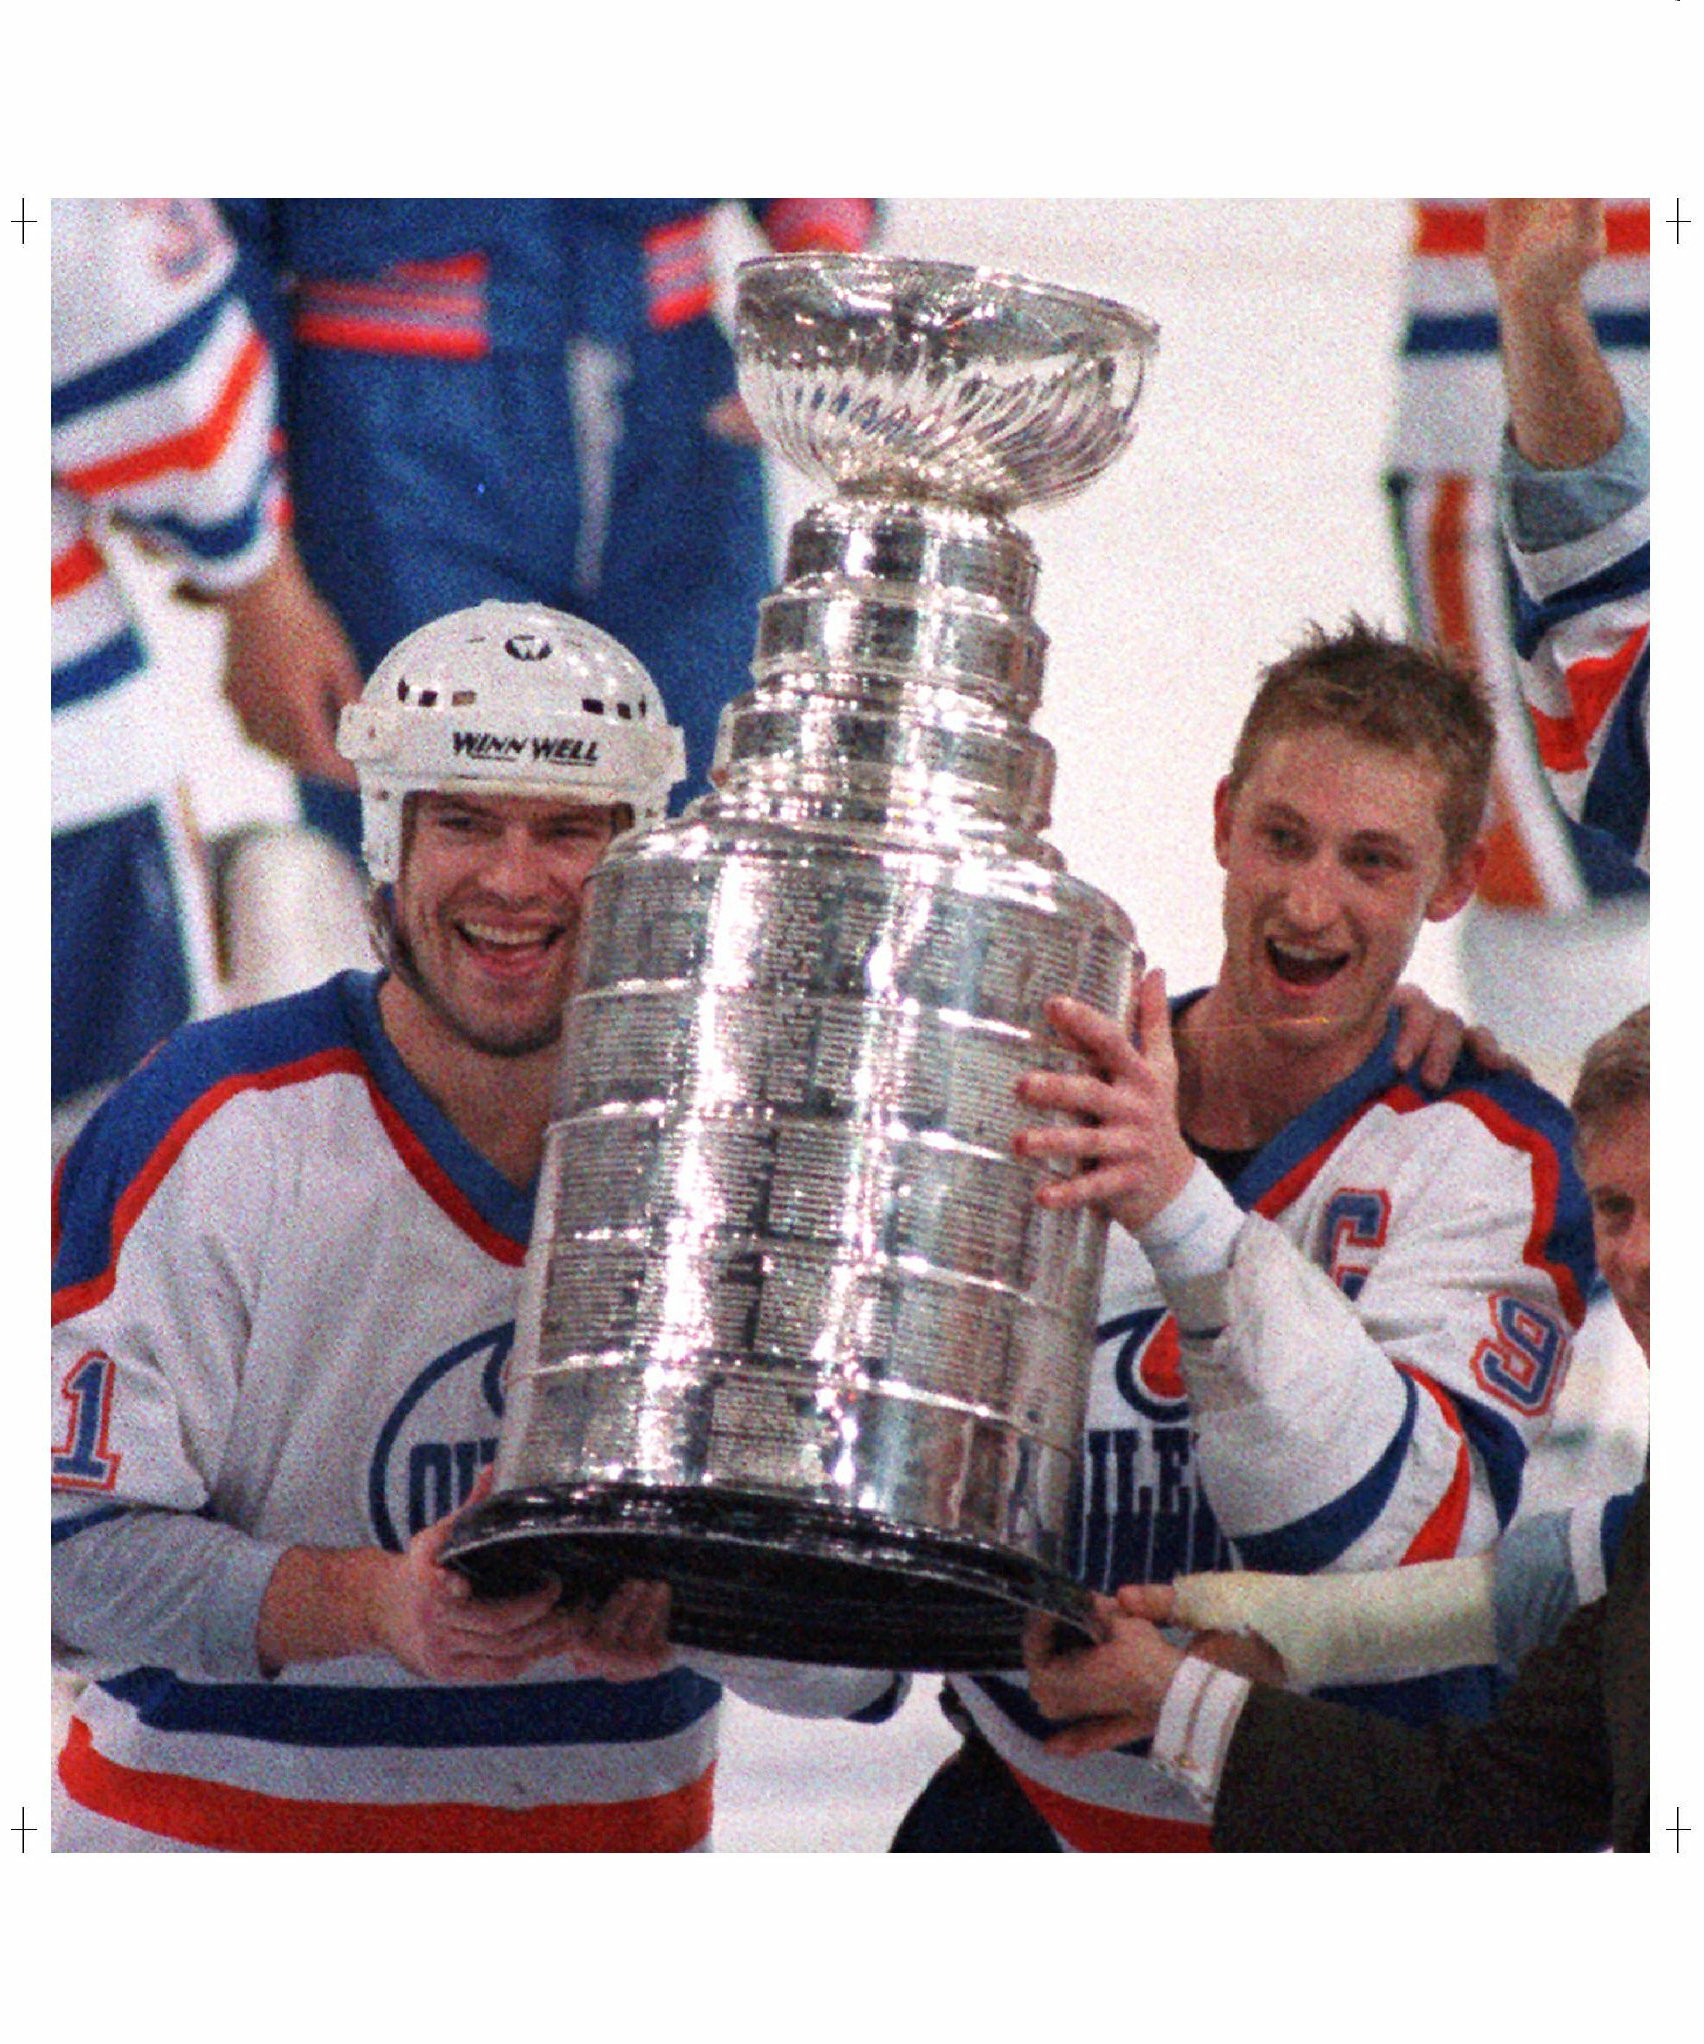 Gretzky: Leafs, Oilers much closer to winning Stanley Cup than people think